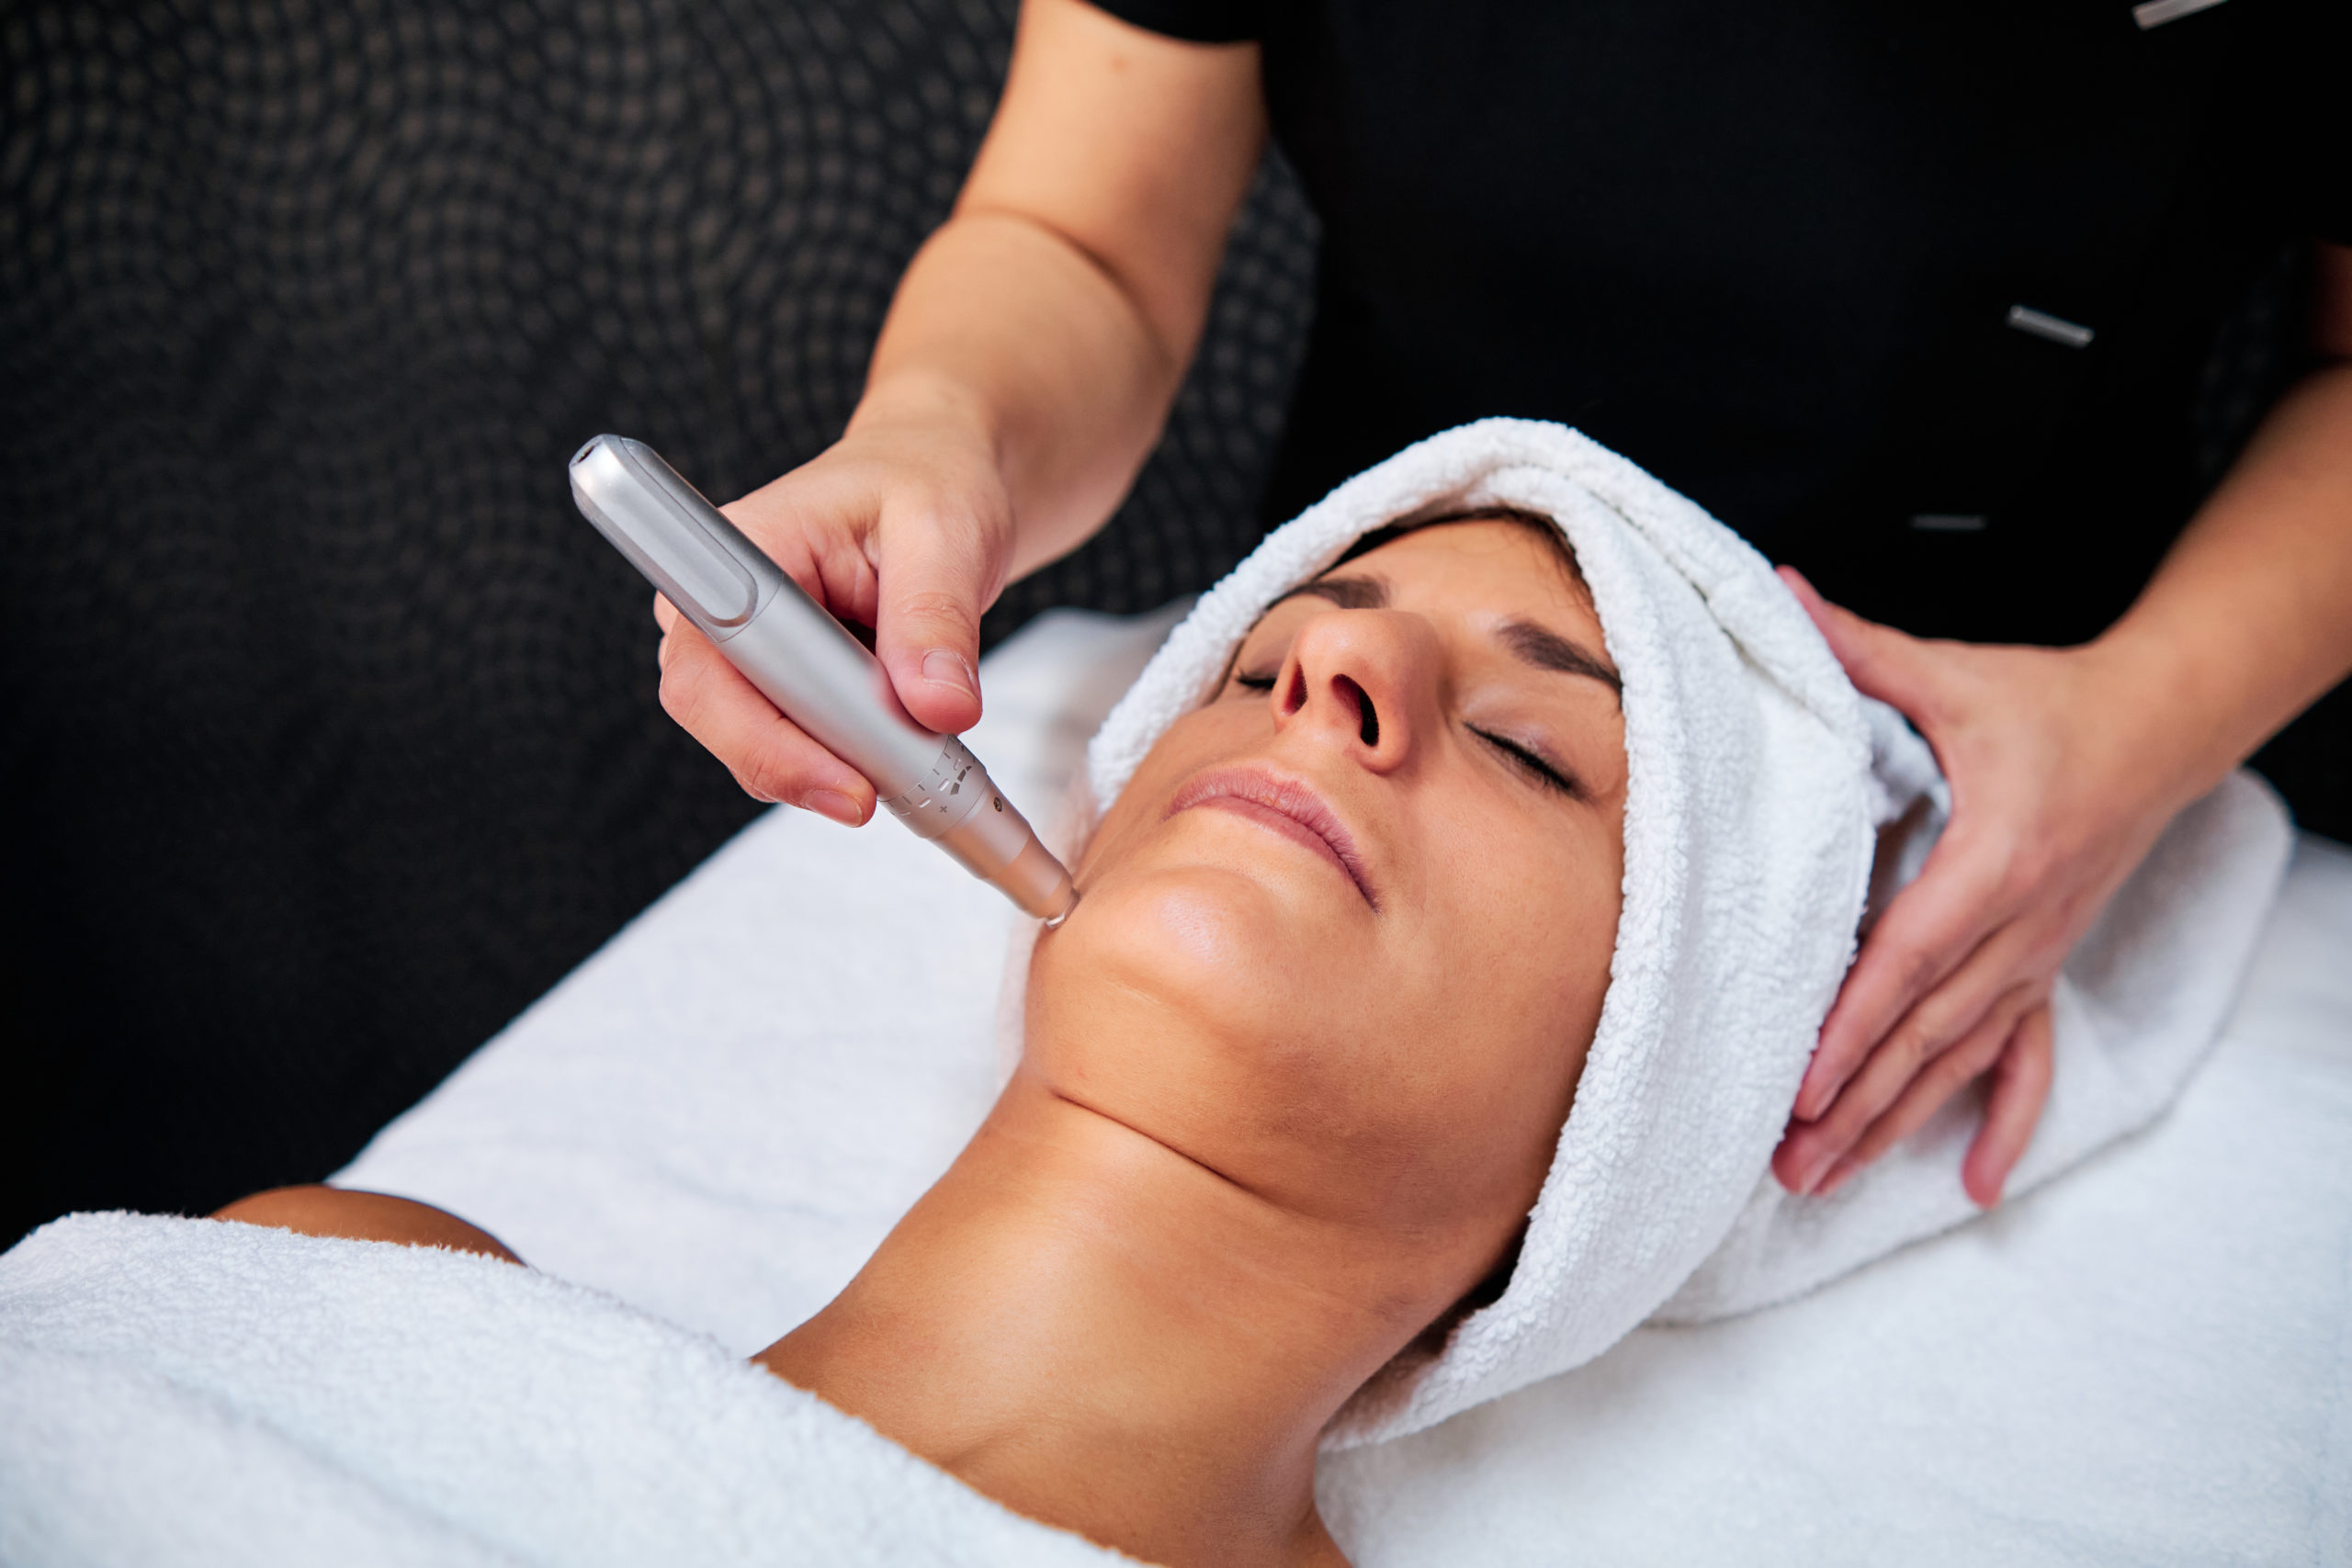 Is Microneedling Safe And Effective For Acne Scars